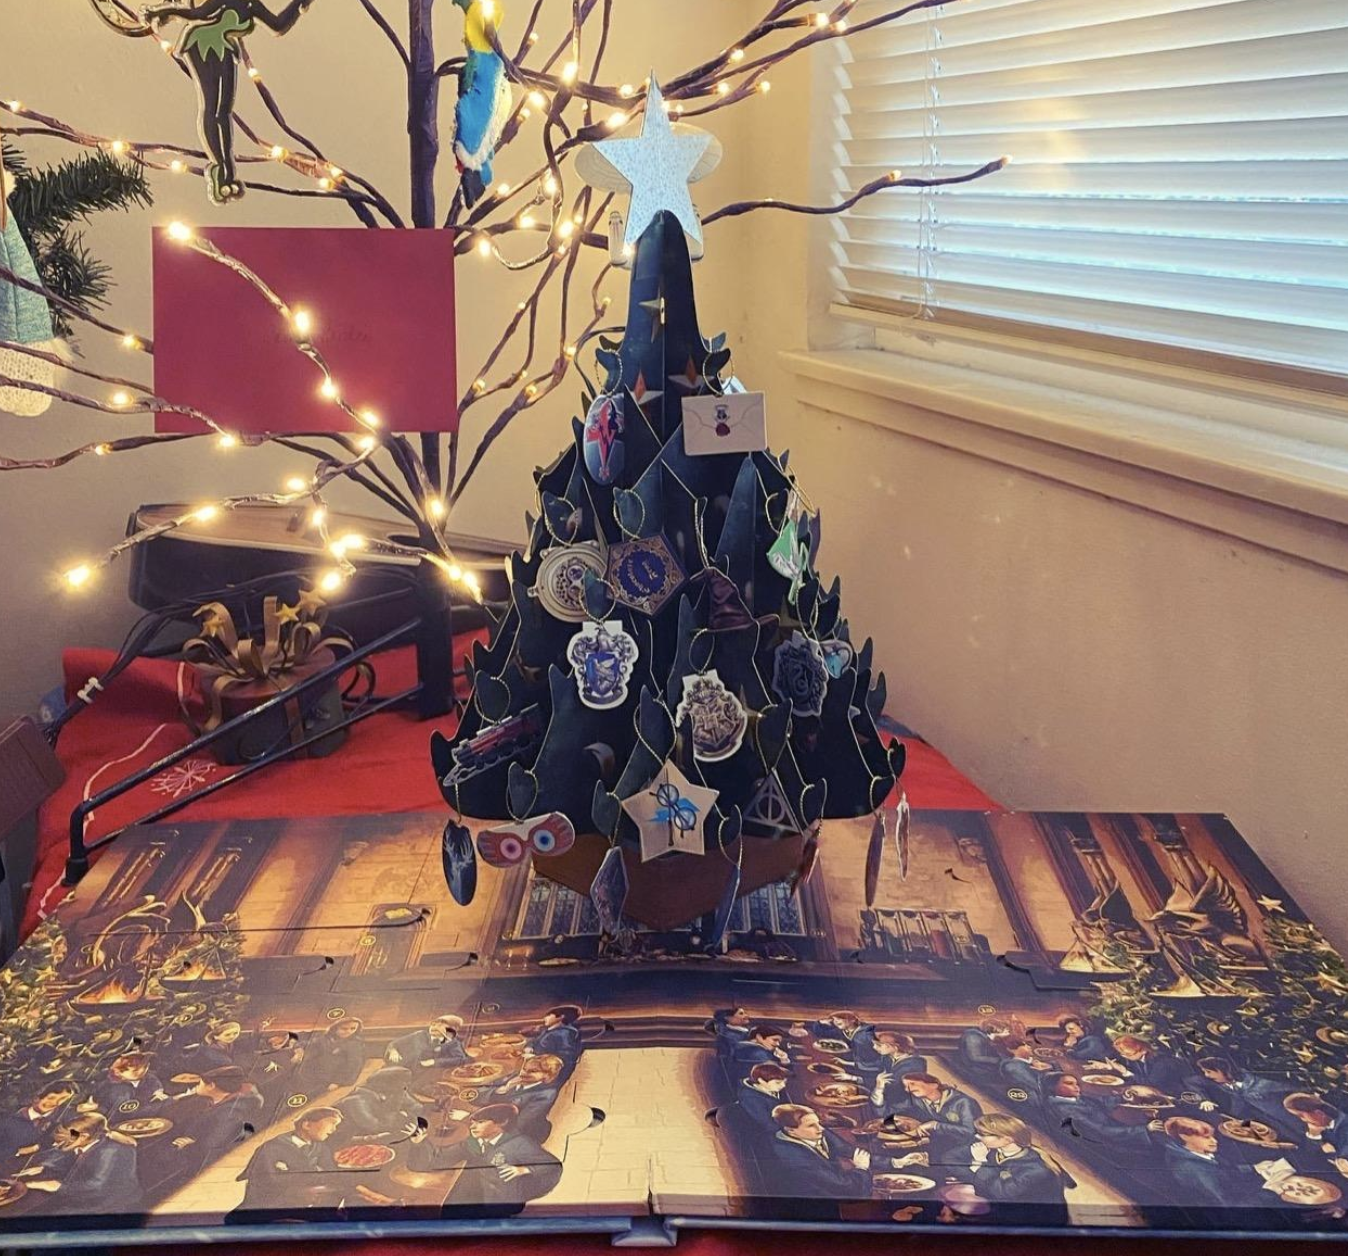 reviewer photo of the Christmas tree decorated with paper ornaments